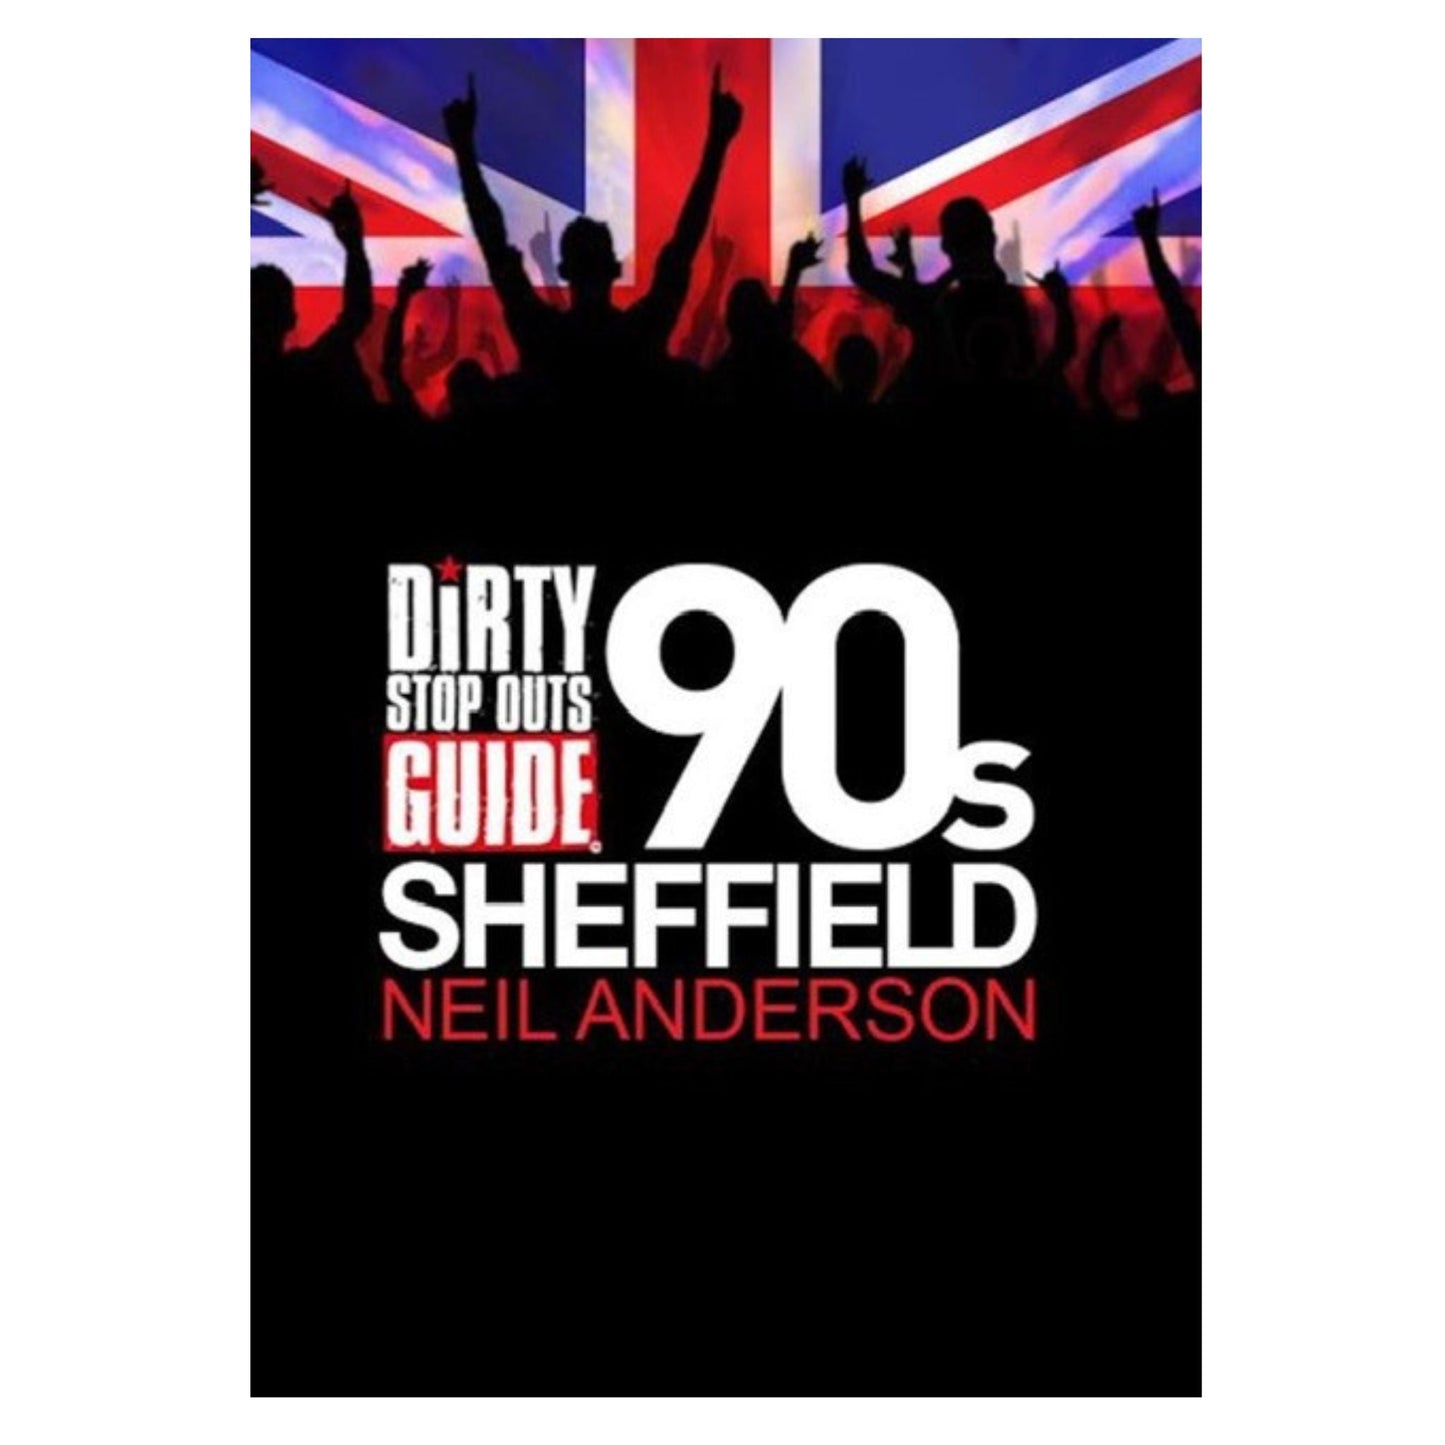 Dirty Stop Out's Guide to 1990s Sheffield - Dirty Stop Outs